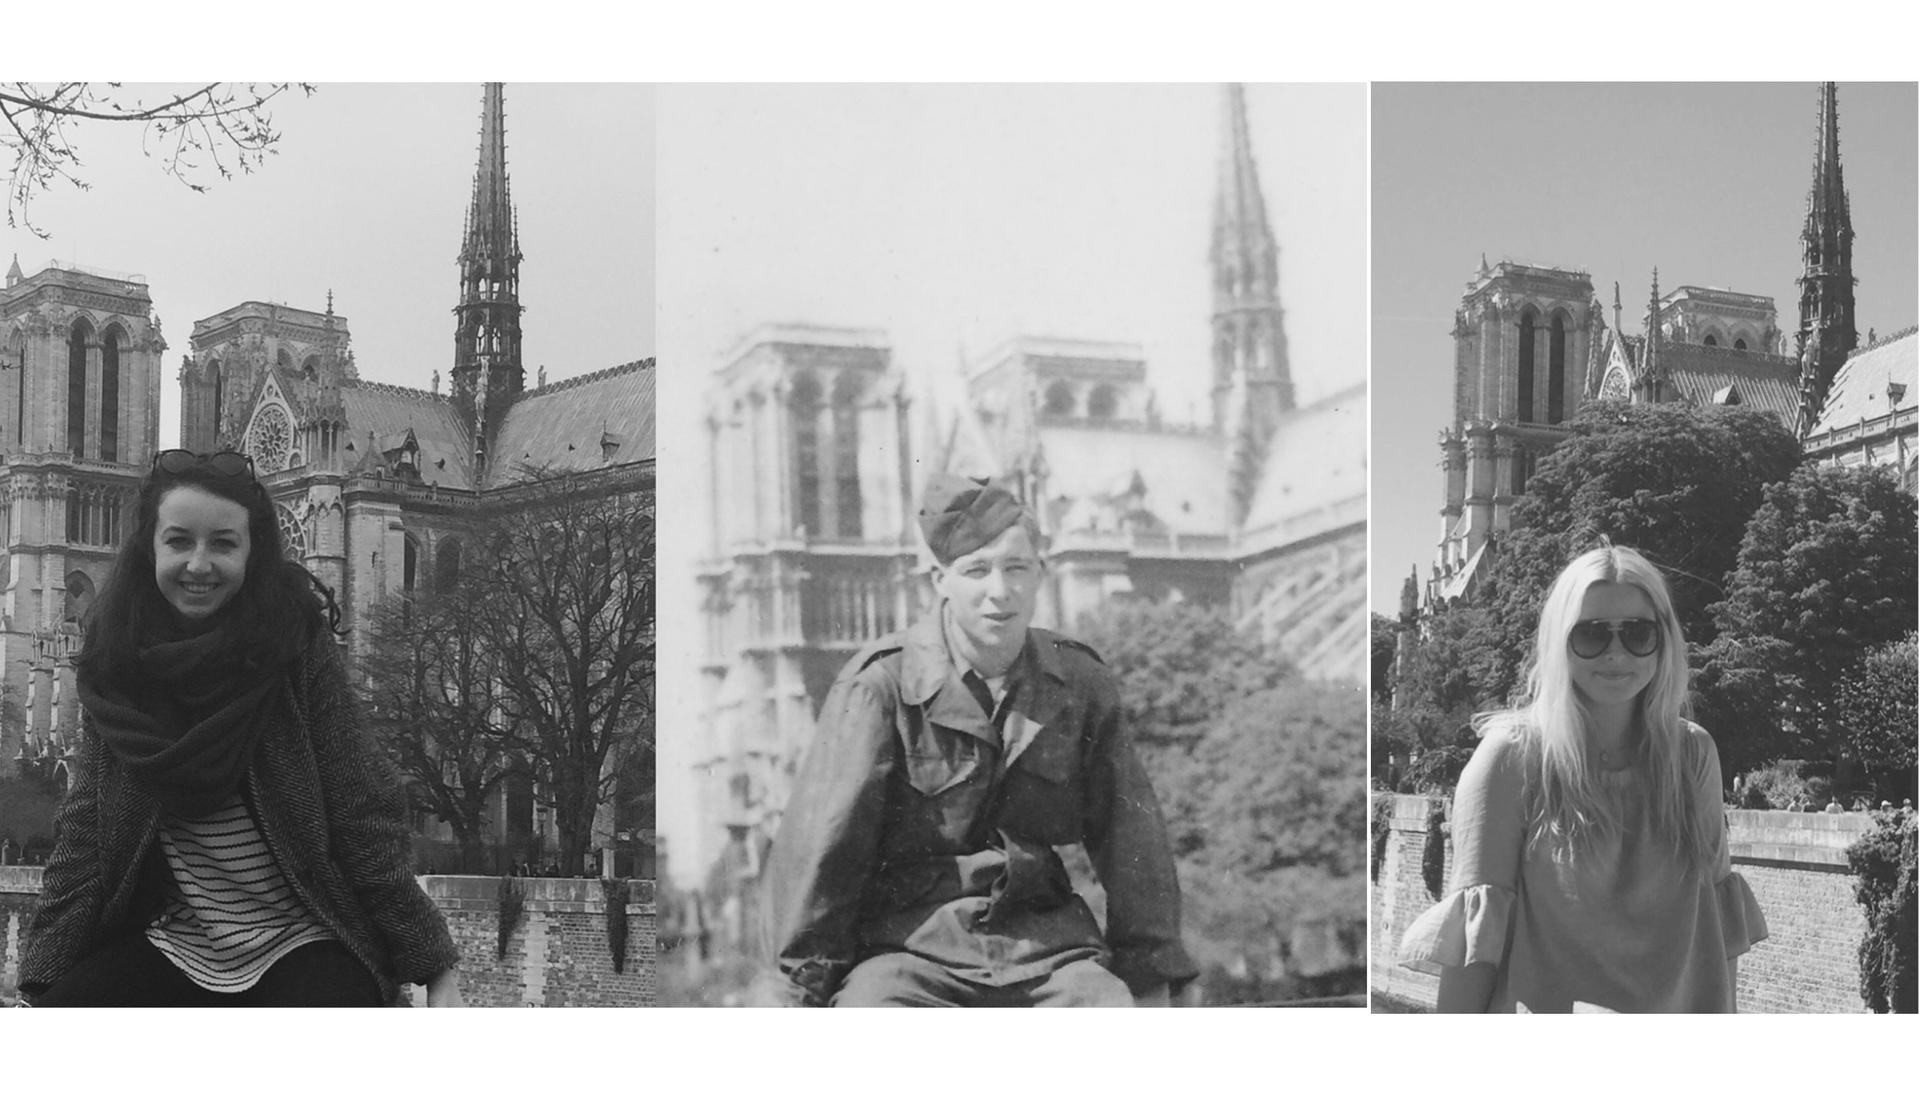 Three people smile in identical photos, part of a family tradition to recreate a WWII-era photo in front of Notre-Dame cathedral